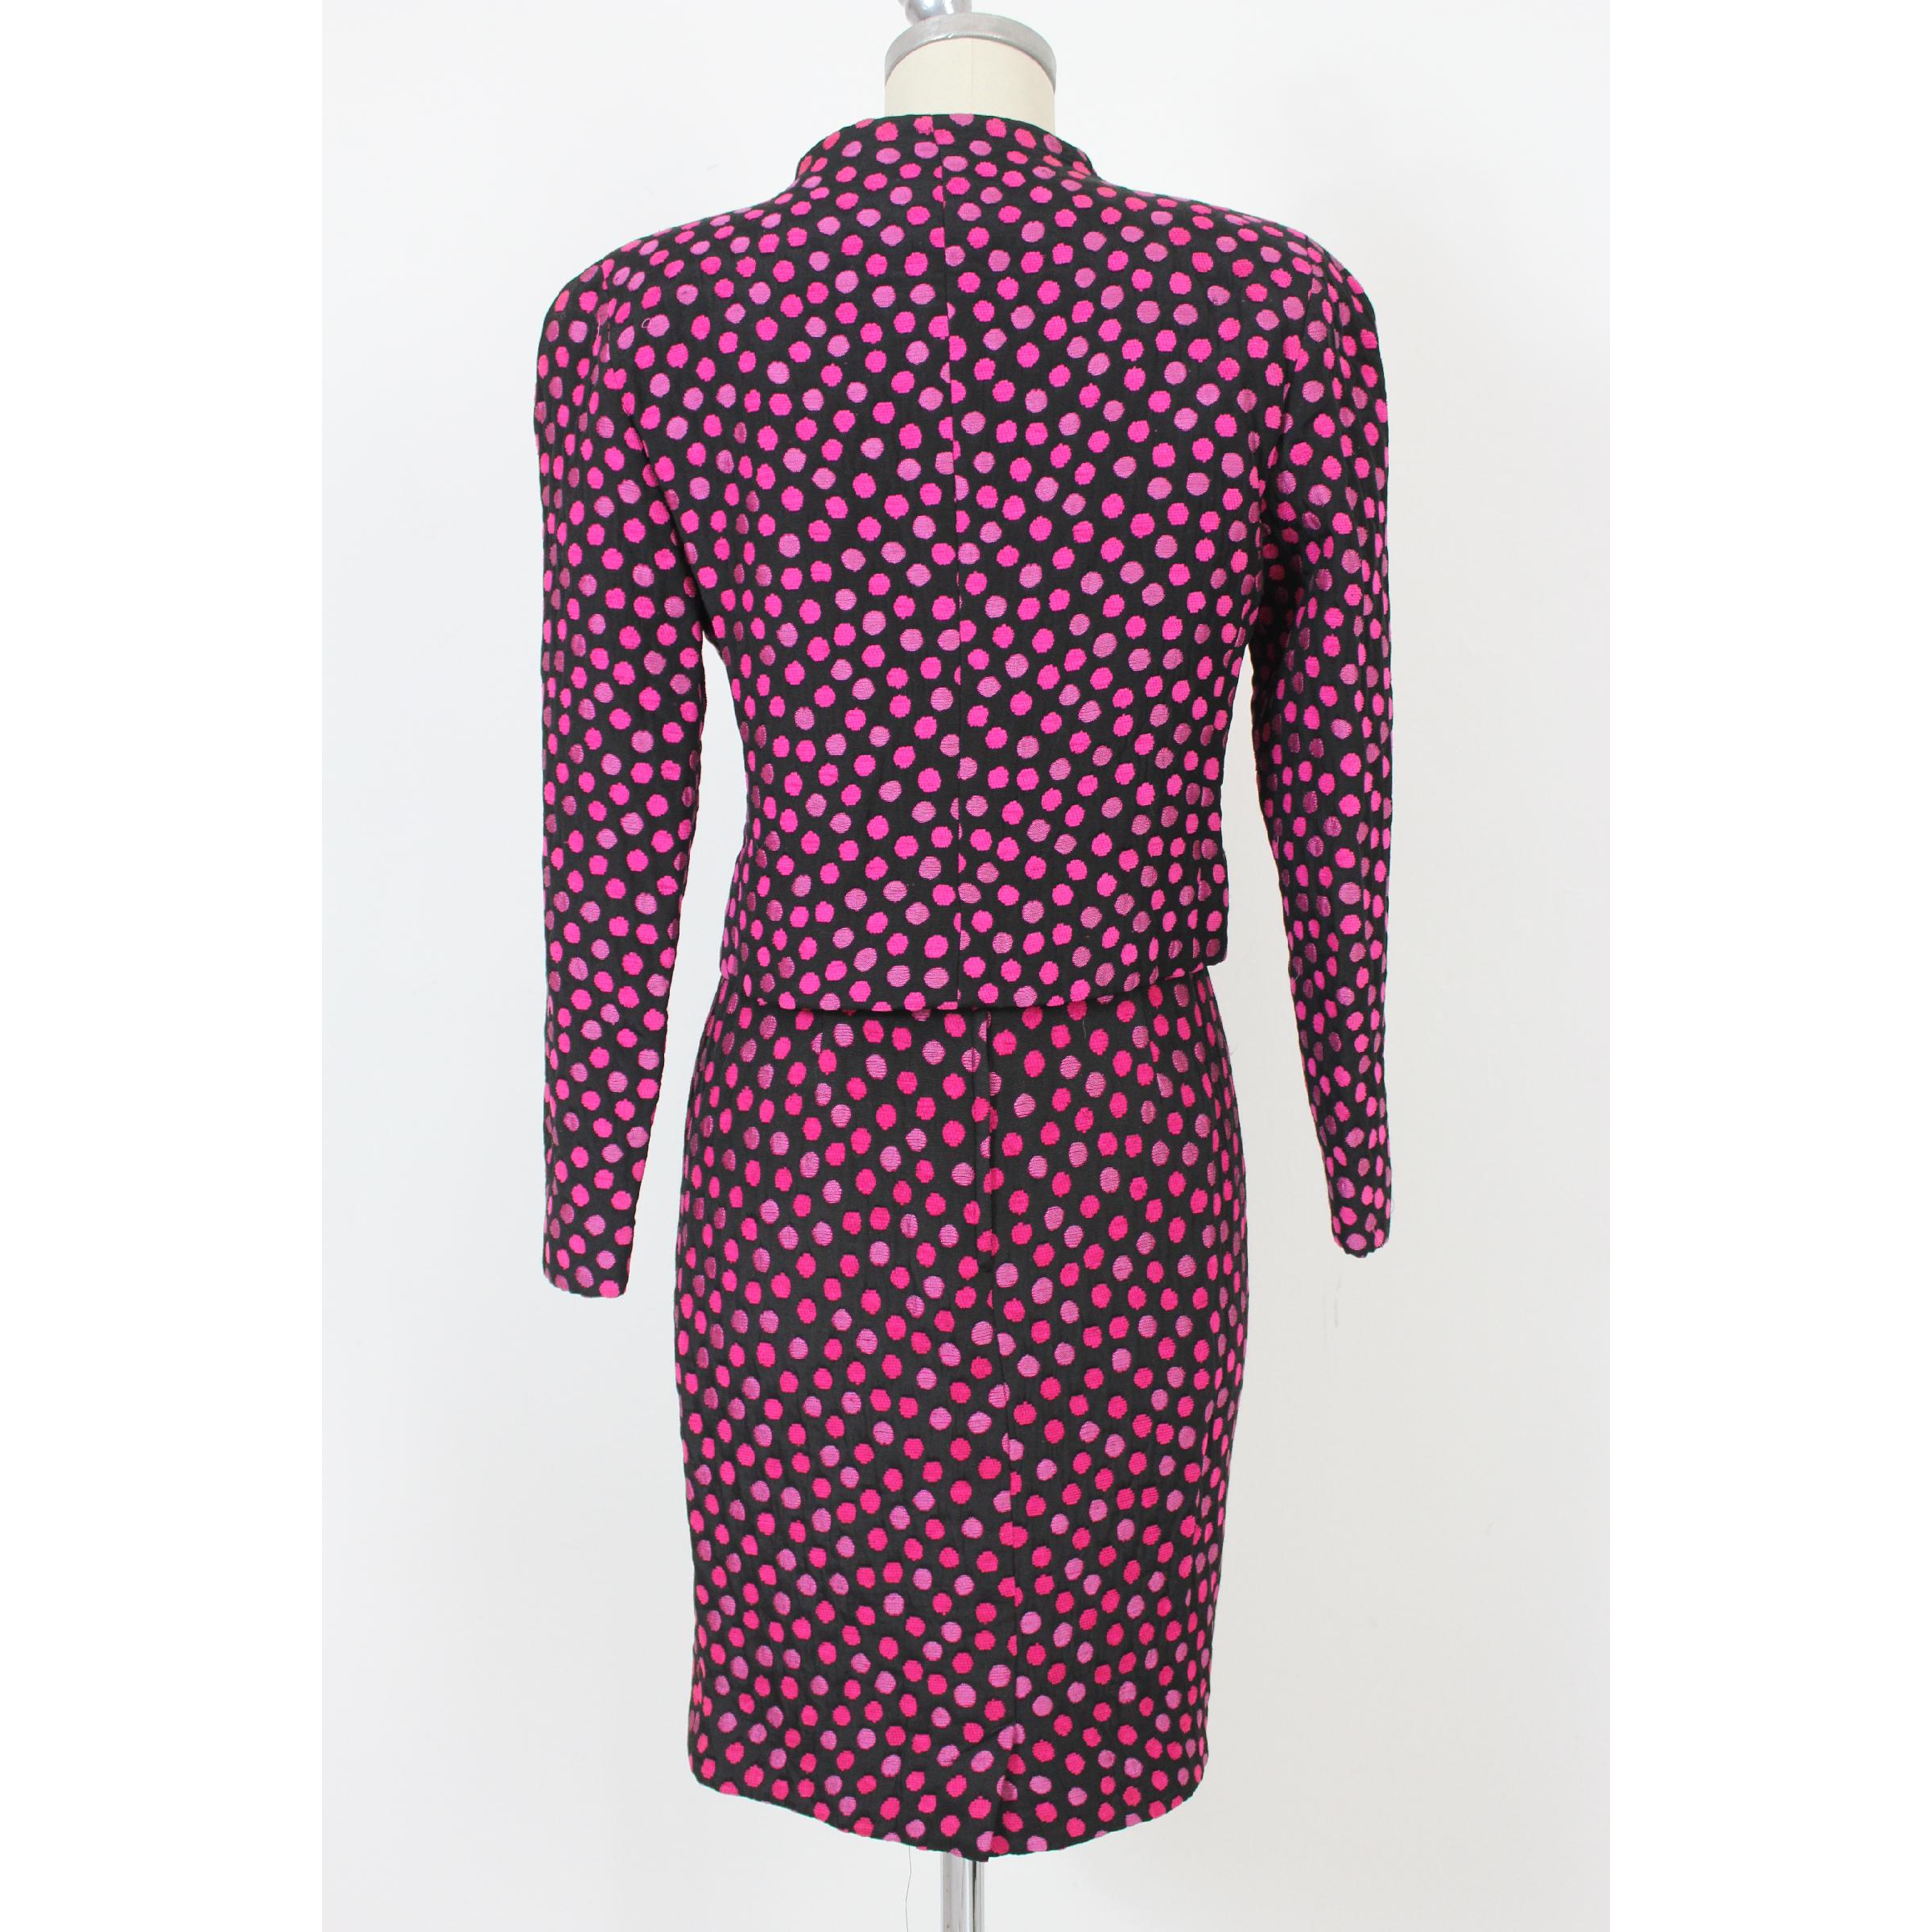 Leonia Polvani vintage women's suit skirt. Ceremony suit, jacket and skirt in wool, black with fuchsia polka dots, on the chest a large satin bow. 80s. Made in Italy. Excellent vintage condition. 

Size: 42 It 8 Us 10 Uk 

Shoulder: 42